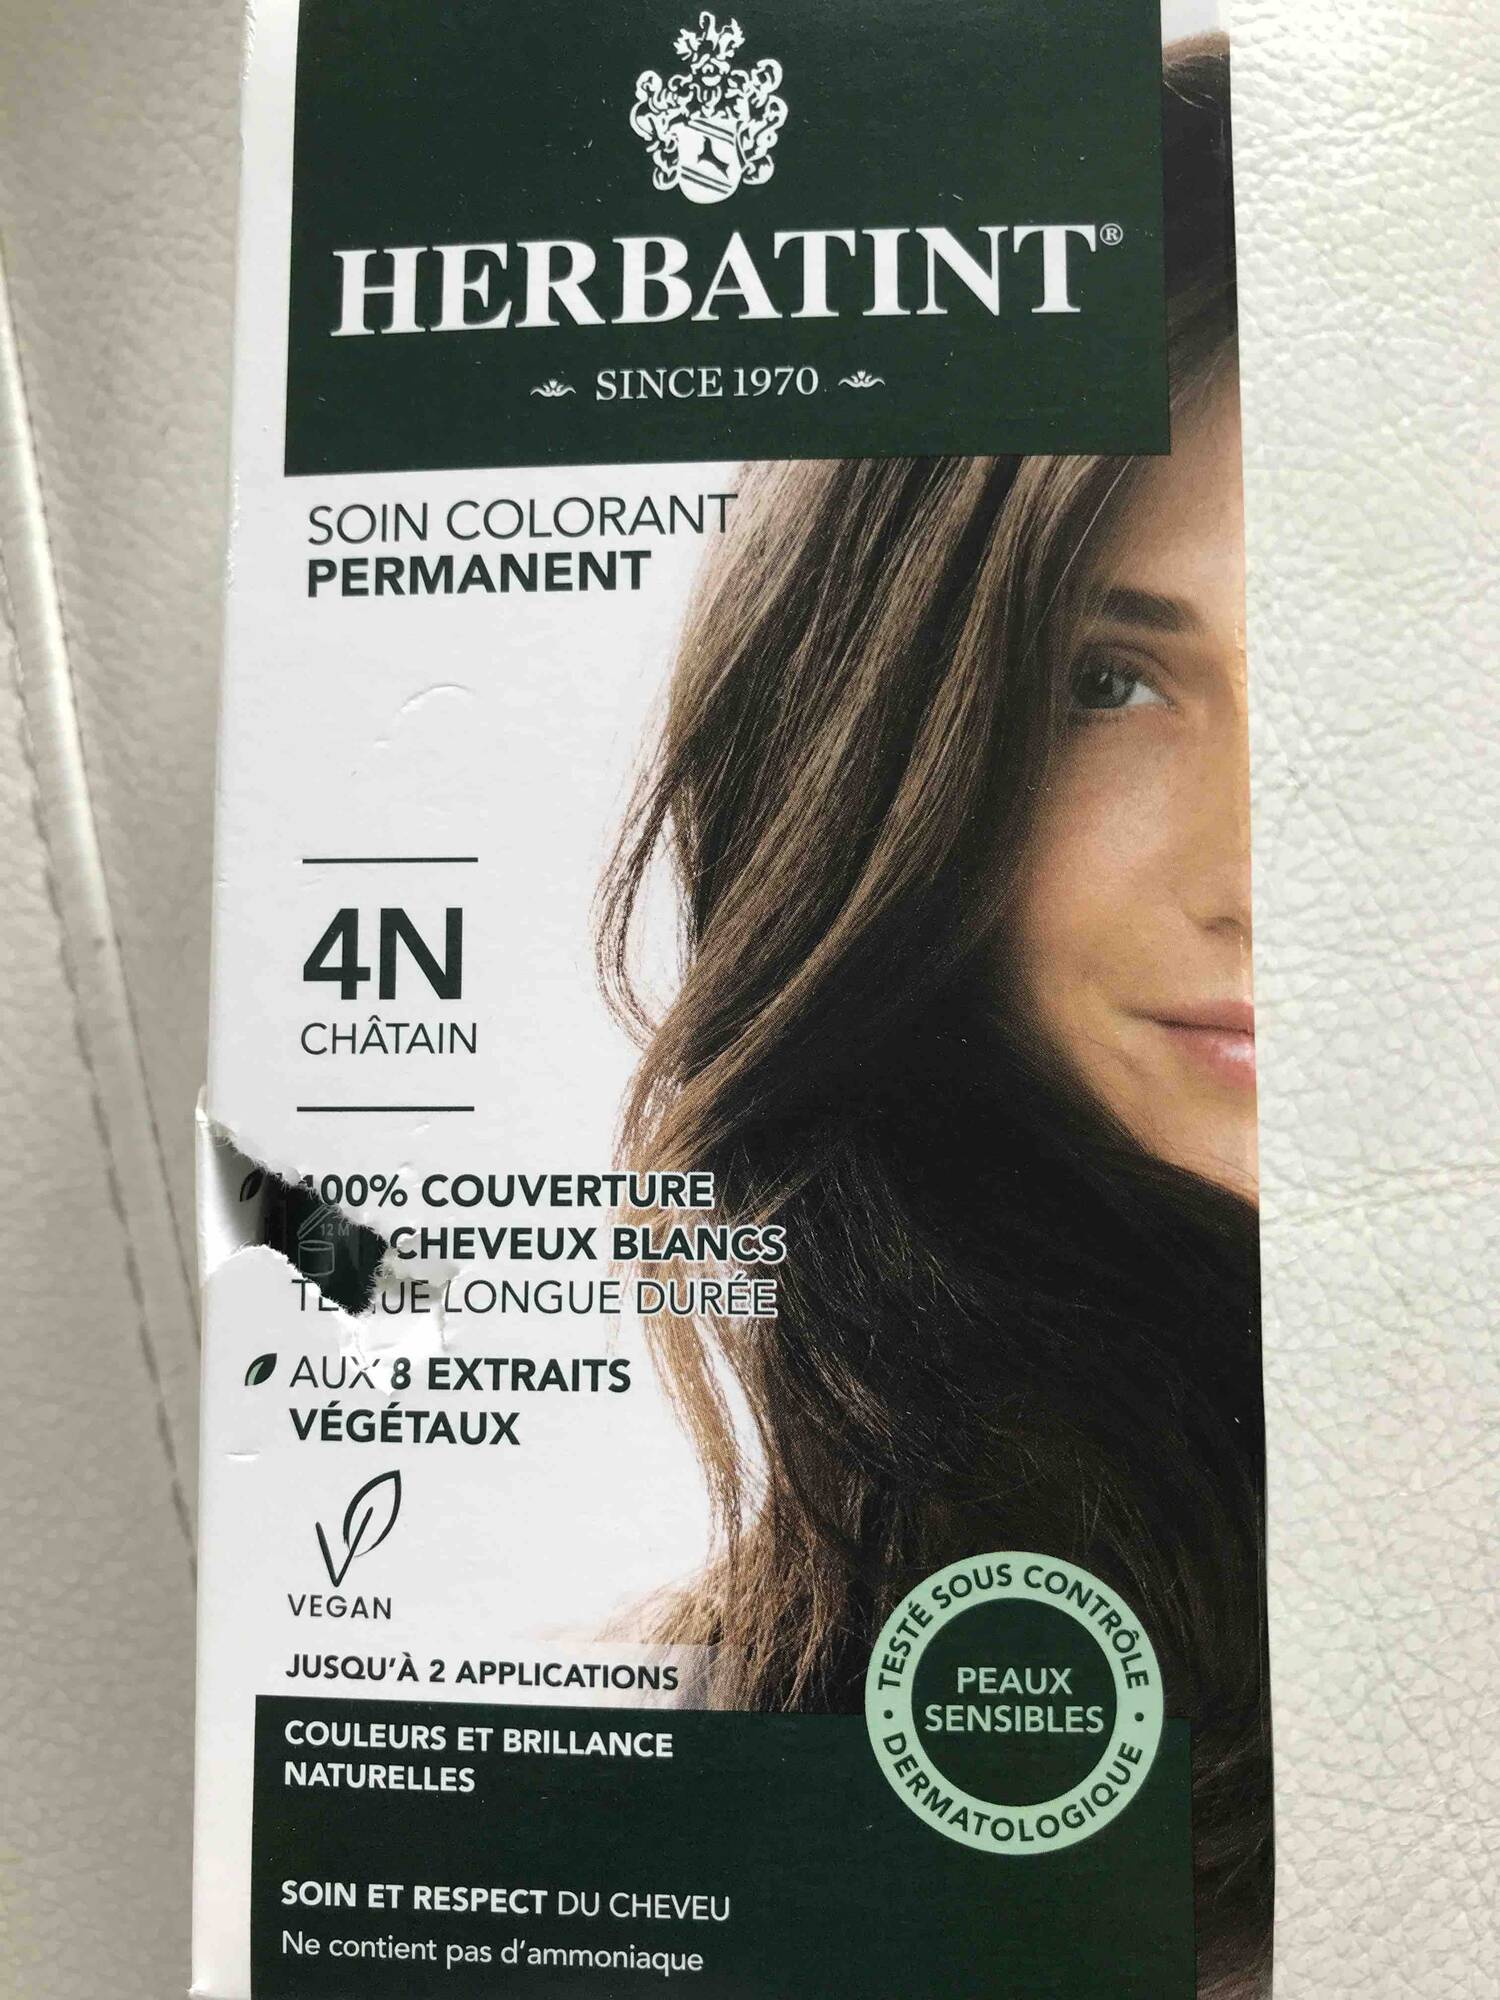 HERBATINT - Soin colorant permanent 4N châtain